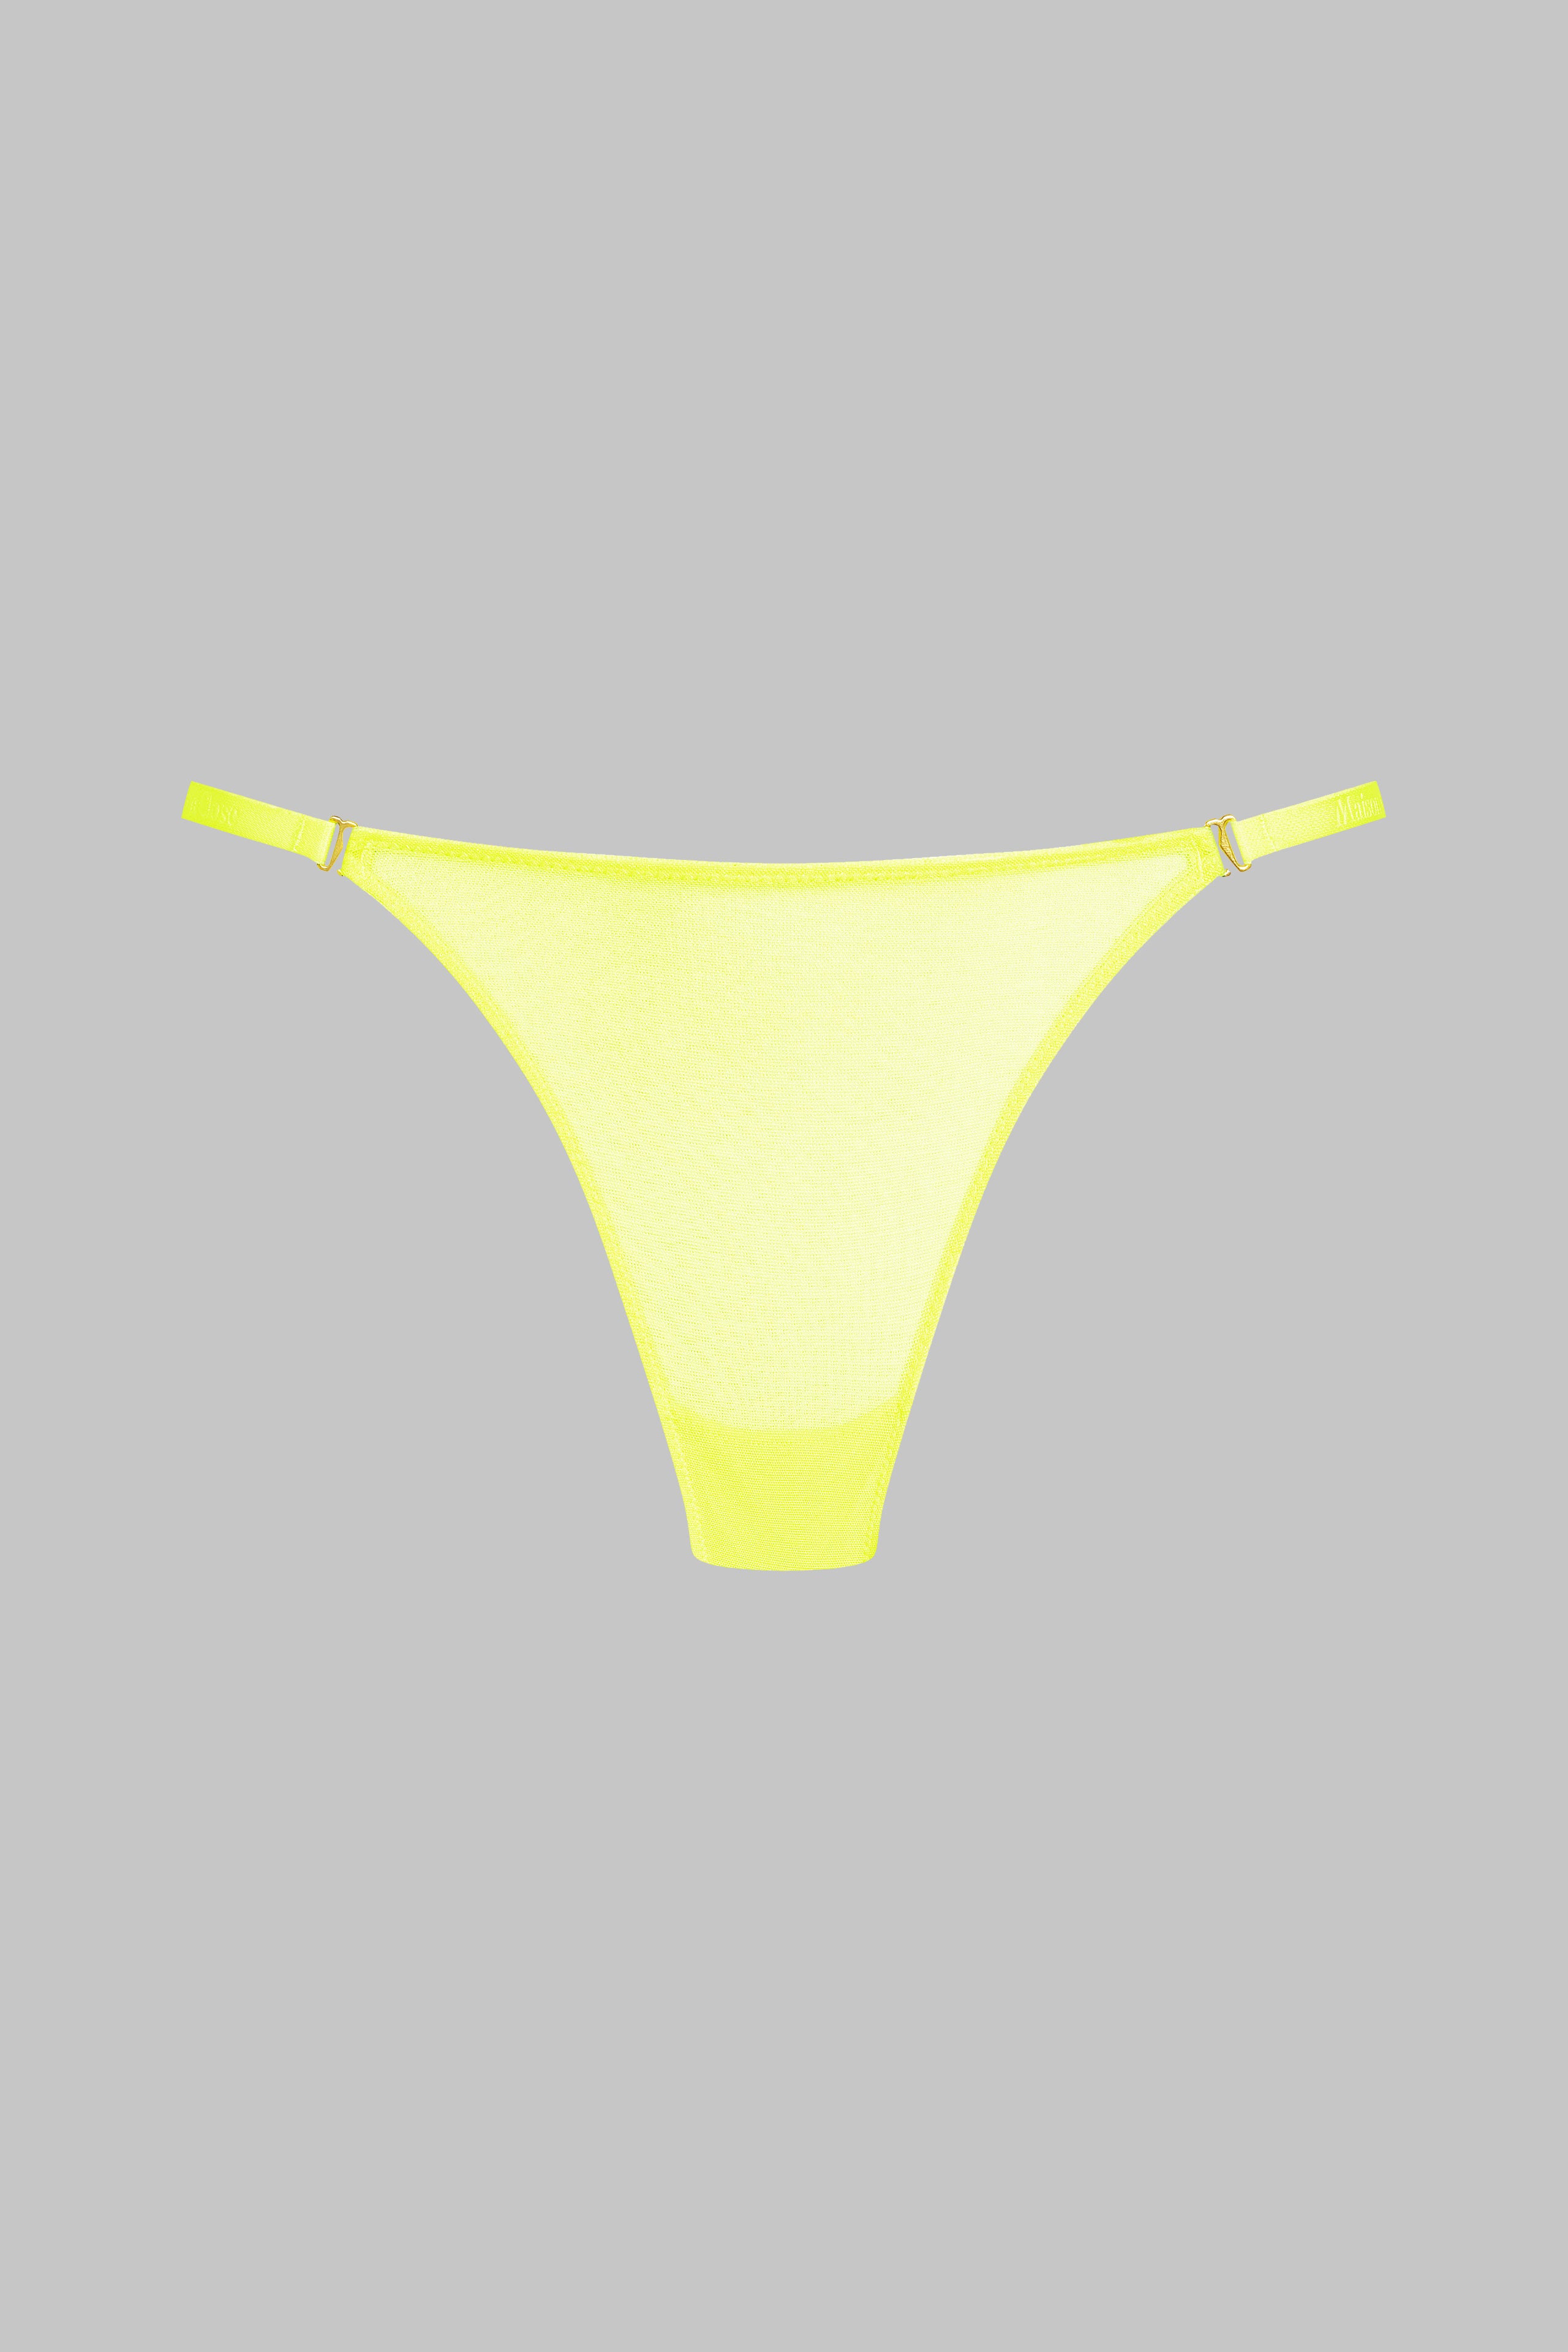 mini-string-corps-a-corps-neon-jaune-fluo-or-maison-close